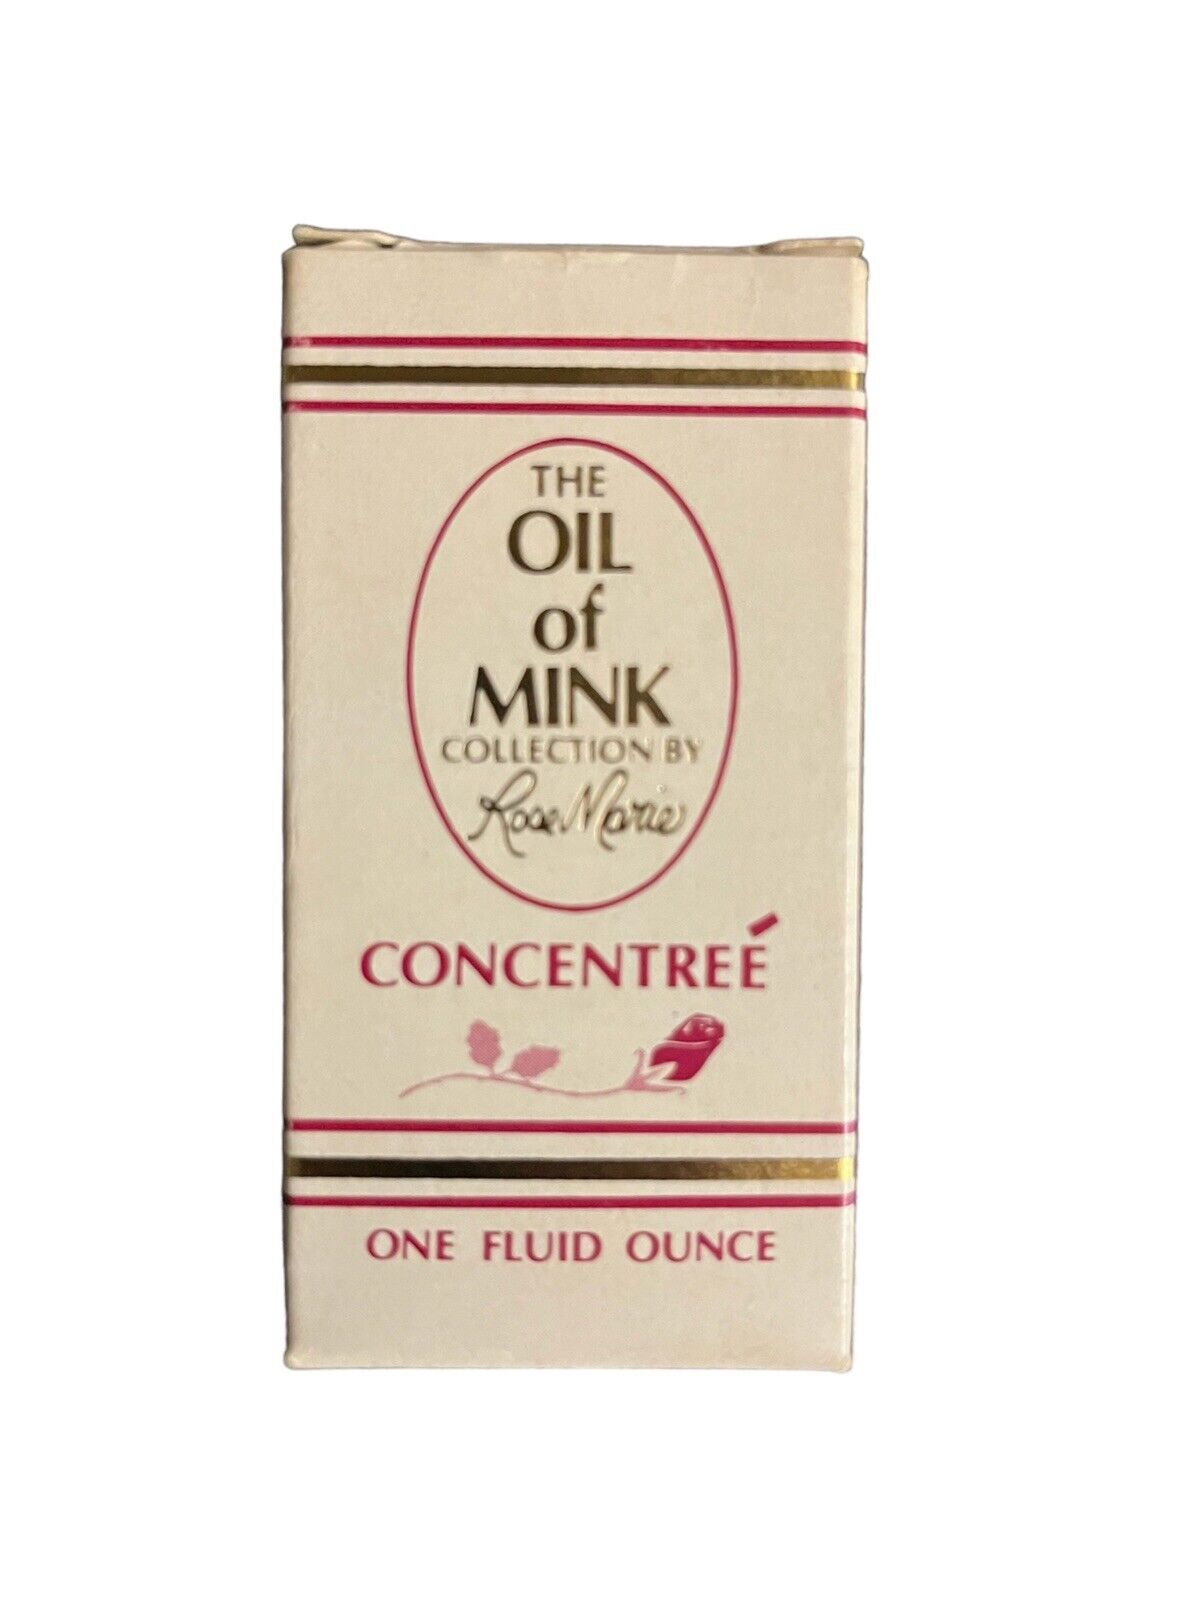 Vintage Oil Of Mink By Rose Marie Concentree 1 Fl Oz RARE - Read